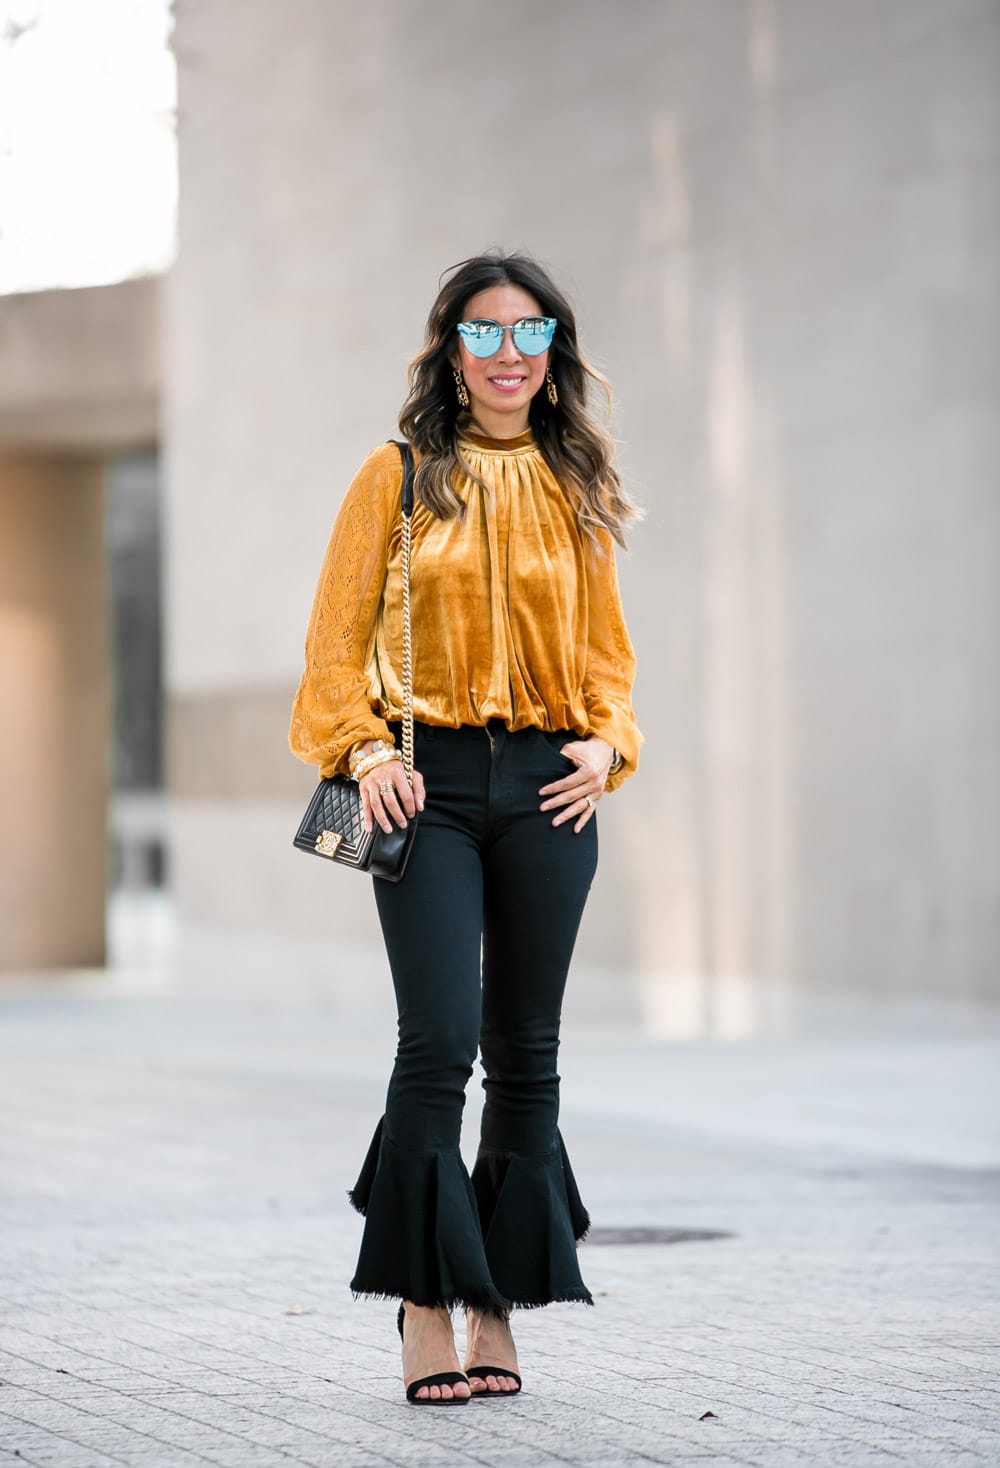 marigold velvet lace top citizens of humanity drew flounce jeans chanel boy bag dior sunglasses